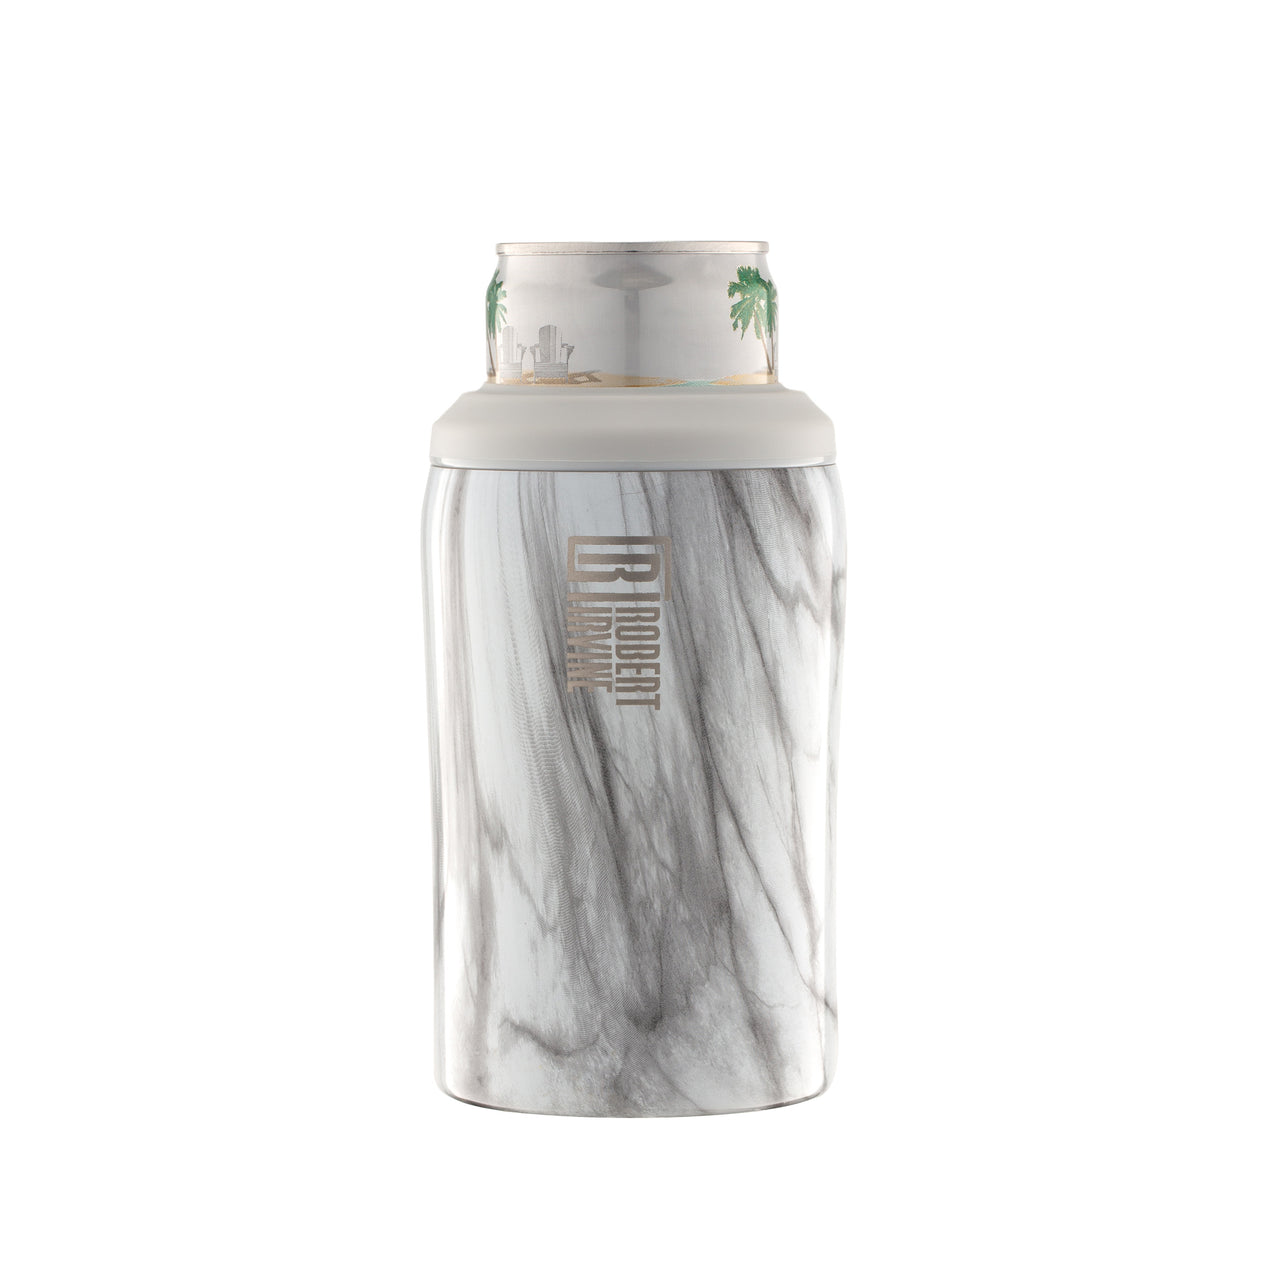 Robert Irvine Insulated 3-in-1 Can Cooler, White